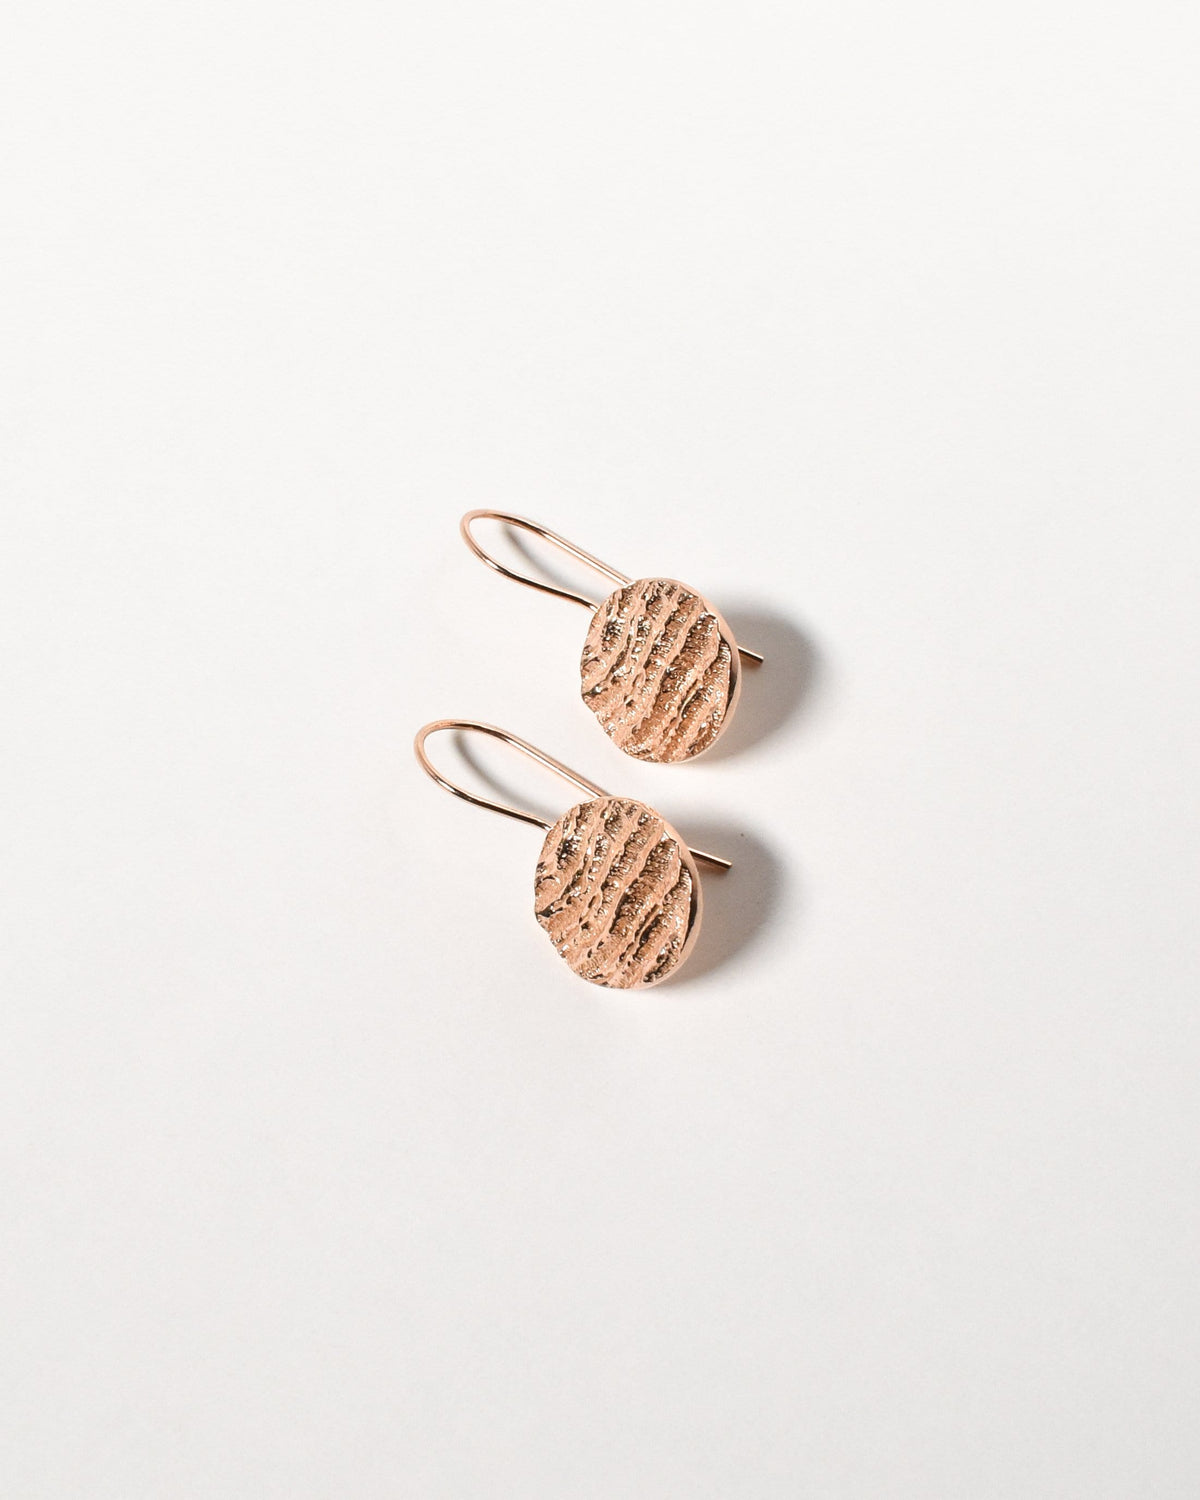 Kutti Earrings, Rose Gold Plated